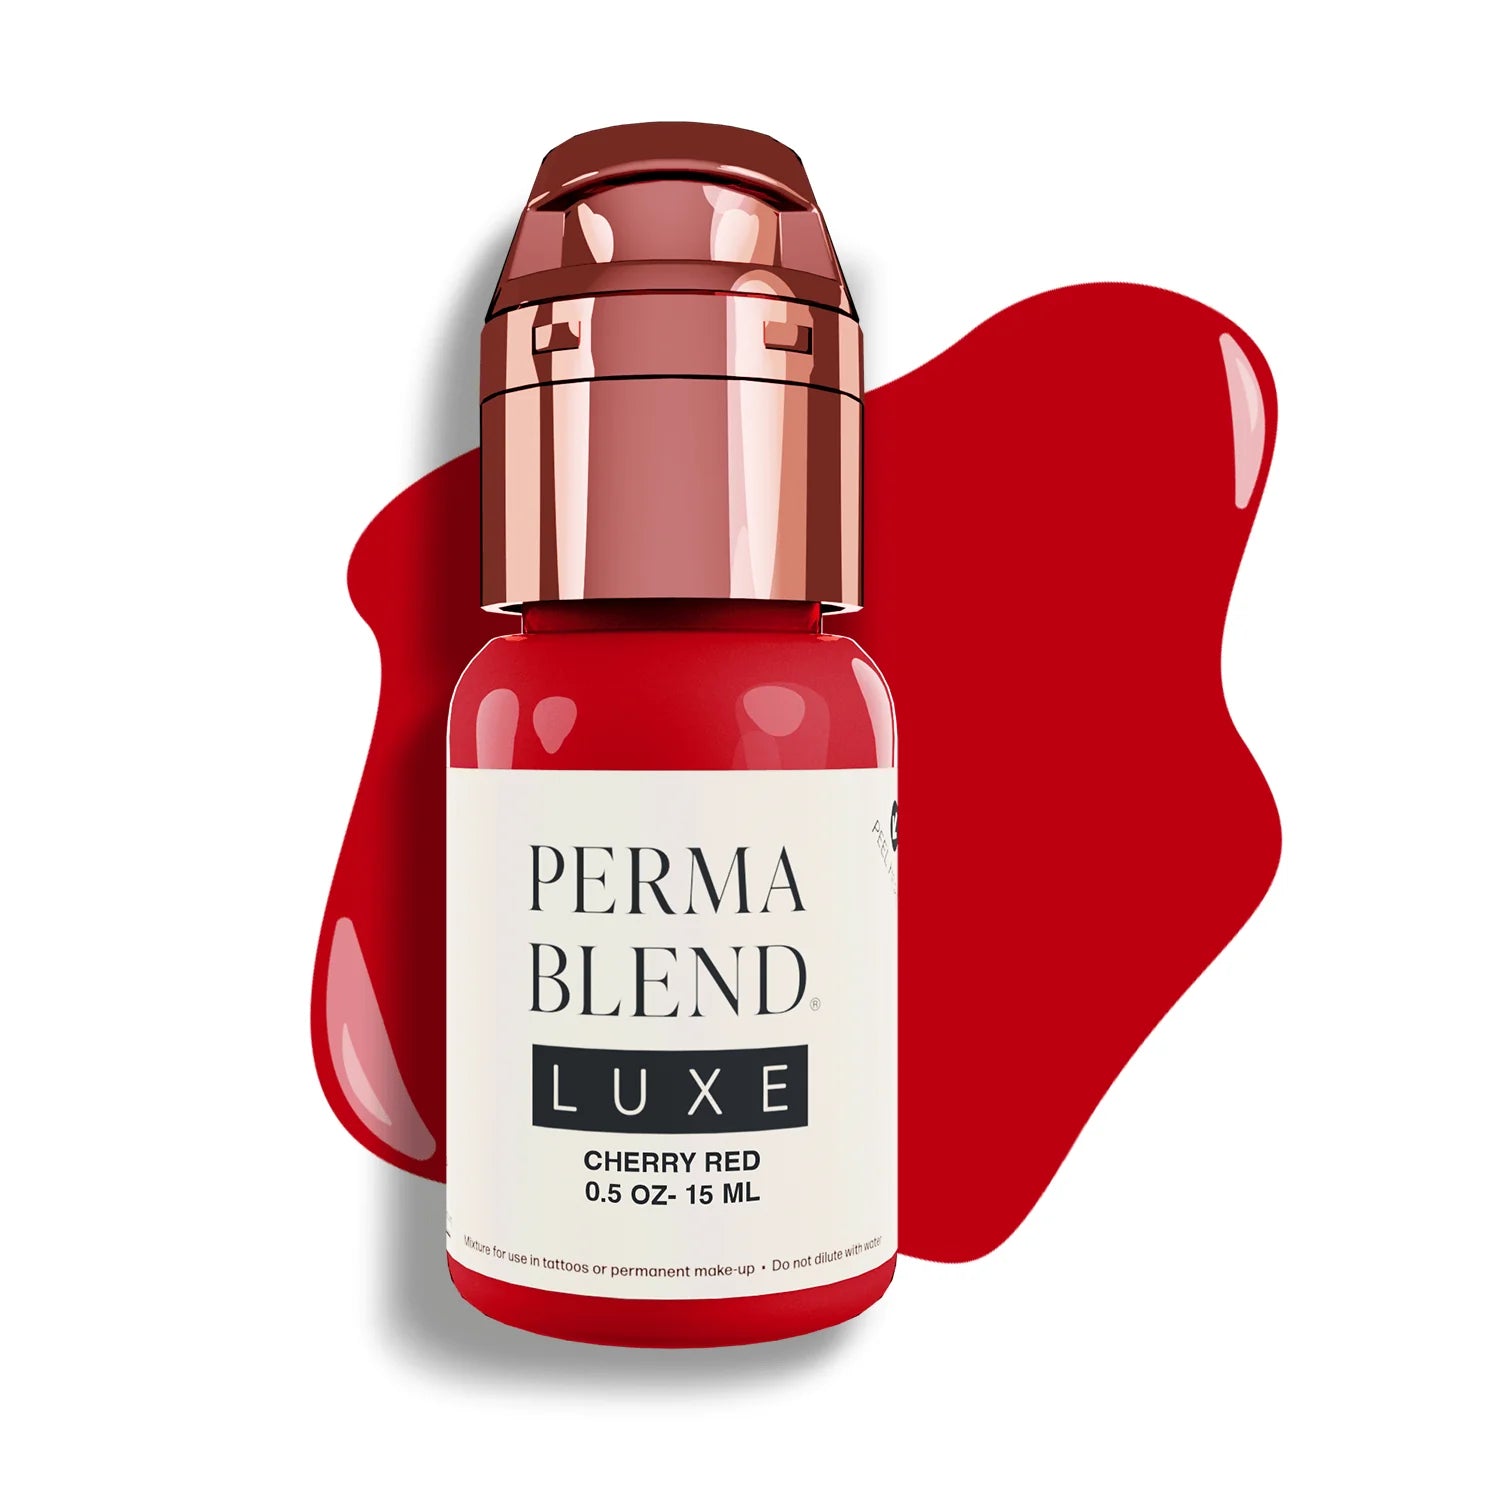 Perma Blend Luxe Cherry Red